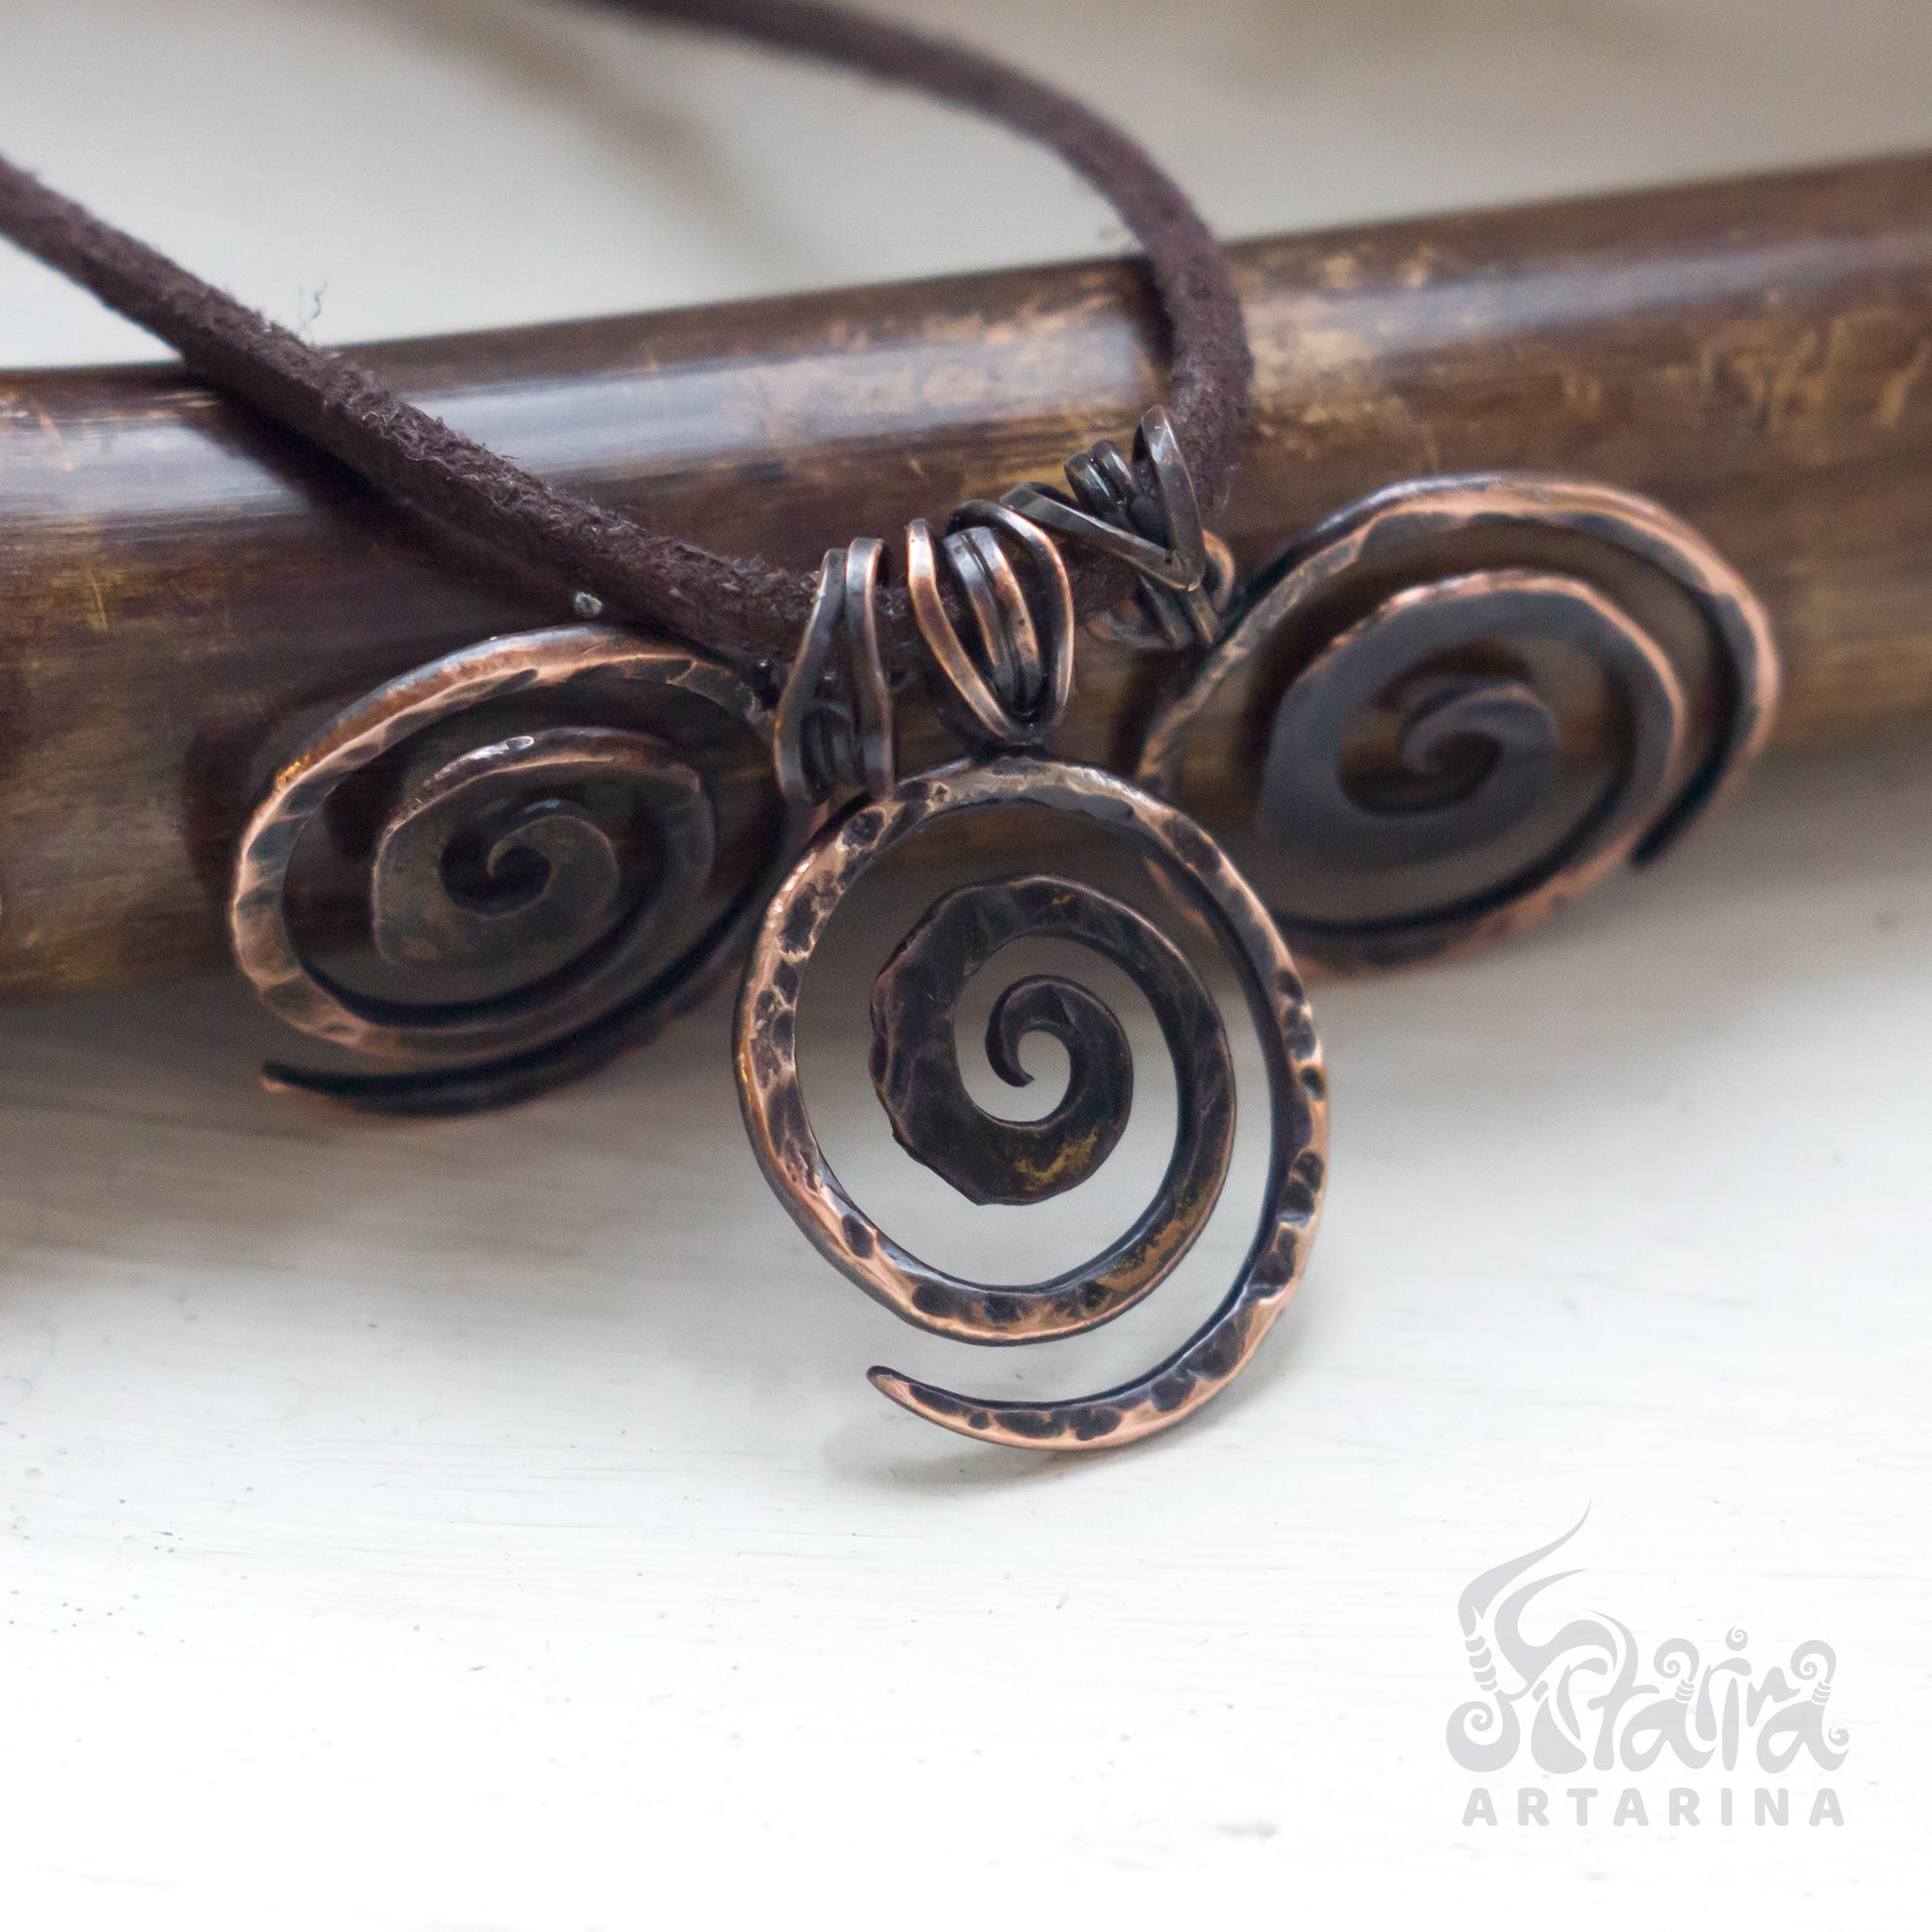 Copper hammered statement spiral necklace / rustic spiral jewelry pic 1